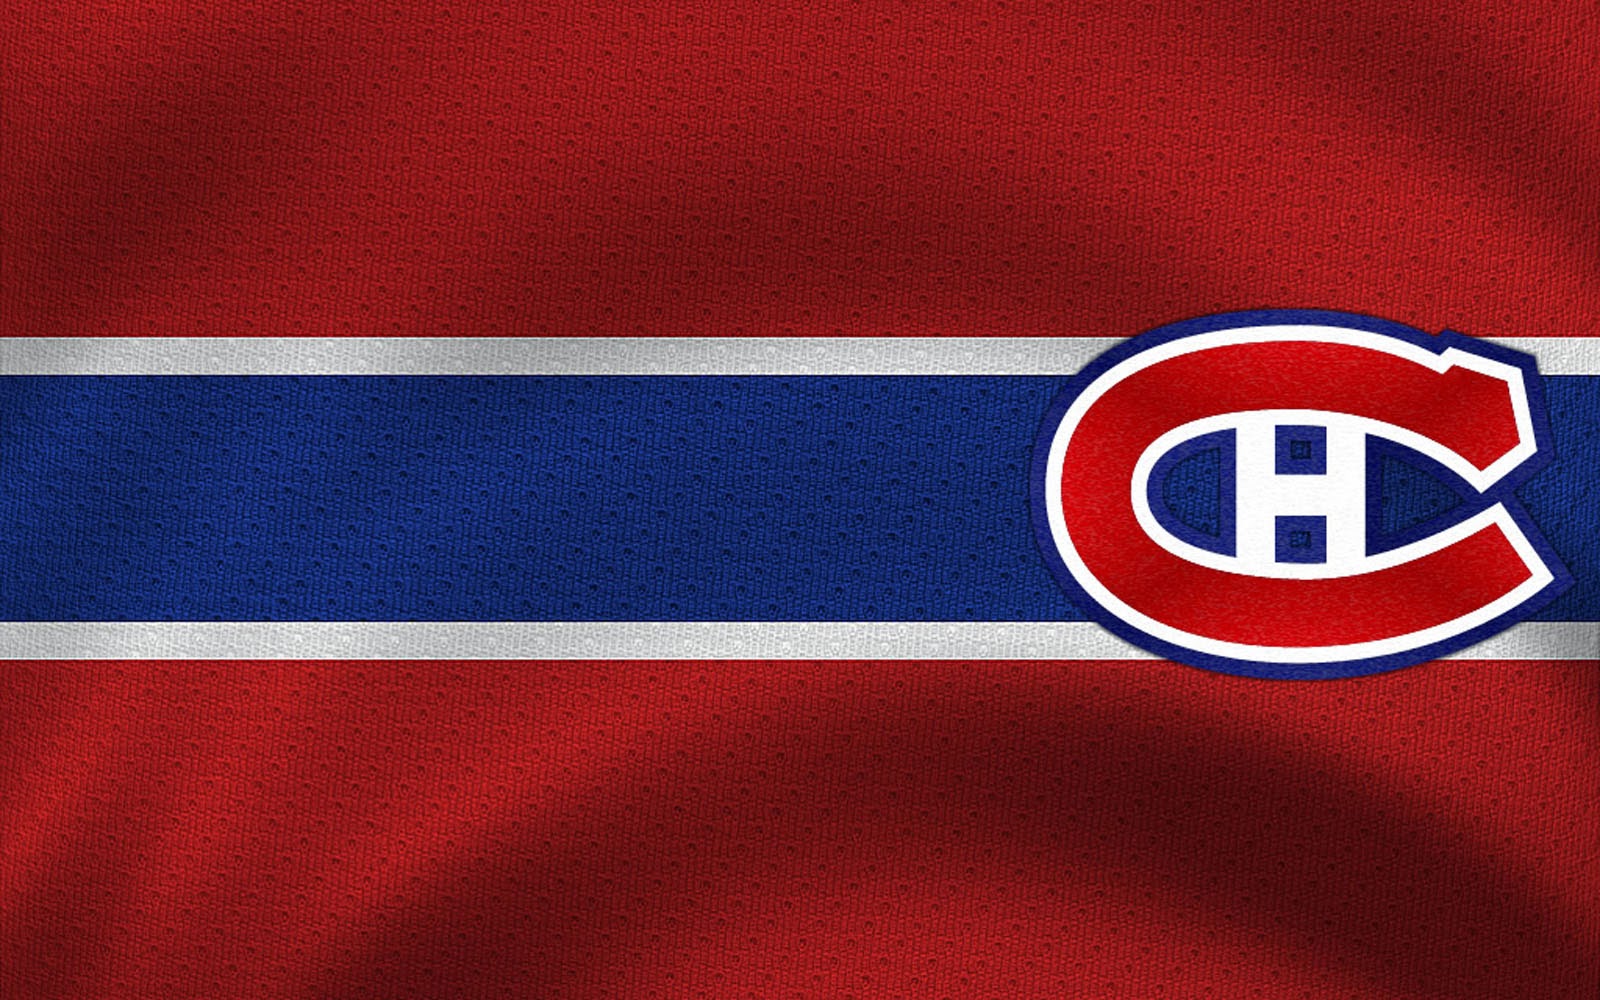 Tag Montreal Canadiens Wallpapers Backgrounds Photos Images and 1600x1000